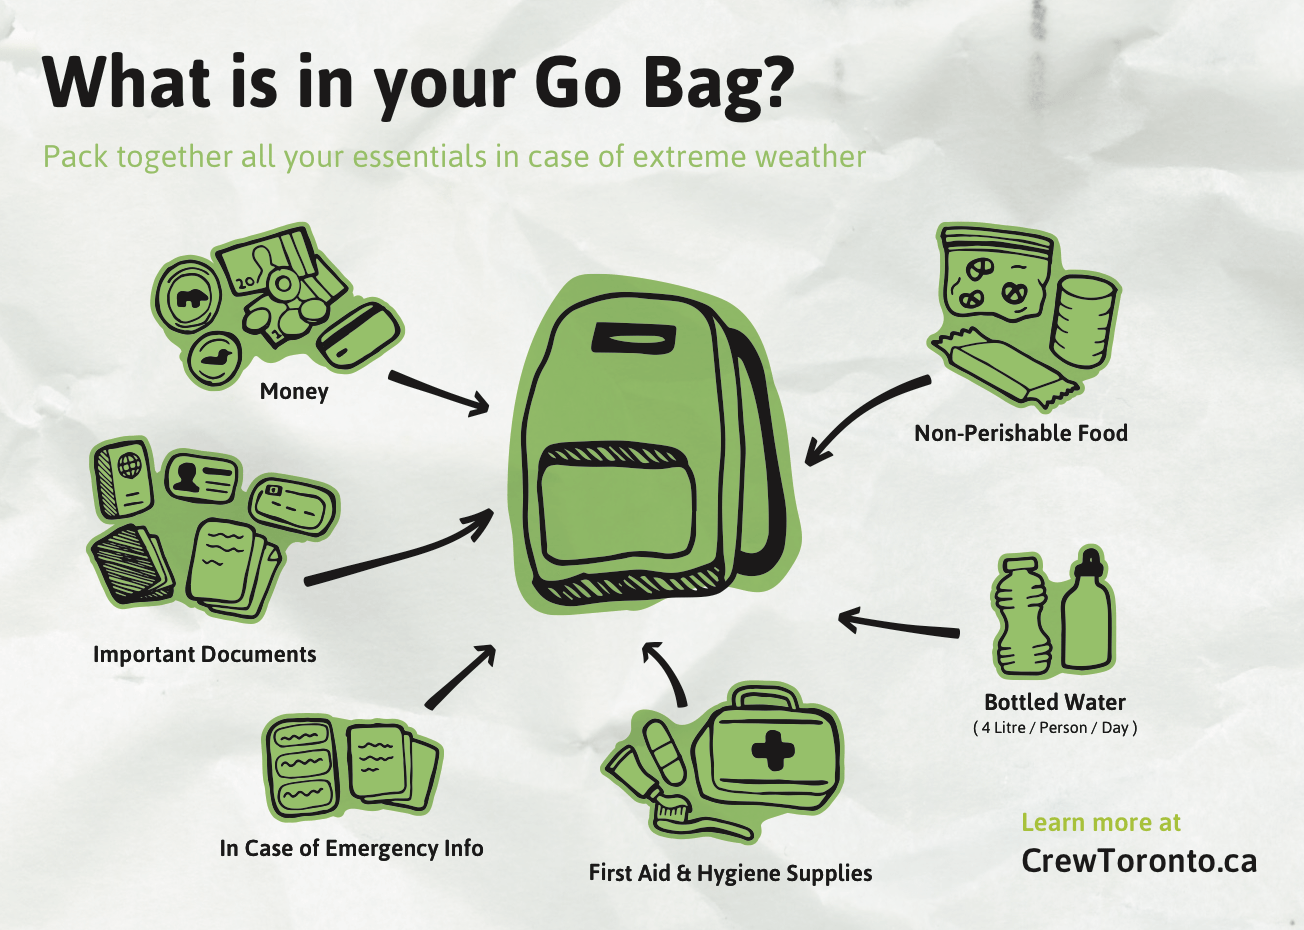 Post card with information about preparing Go Bag. What is in your Go Bag? Pack together all your essentials in case of extreme weather.